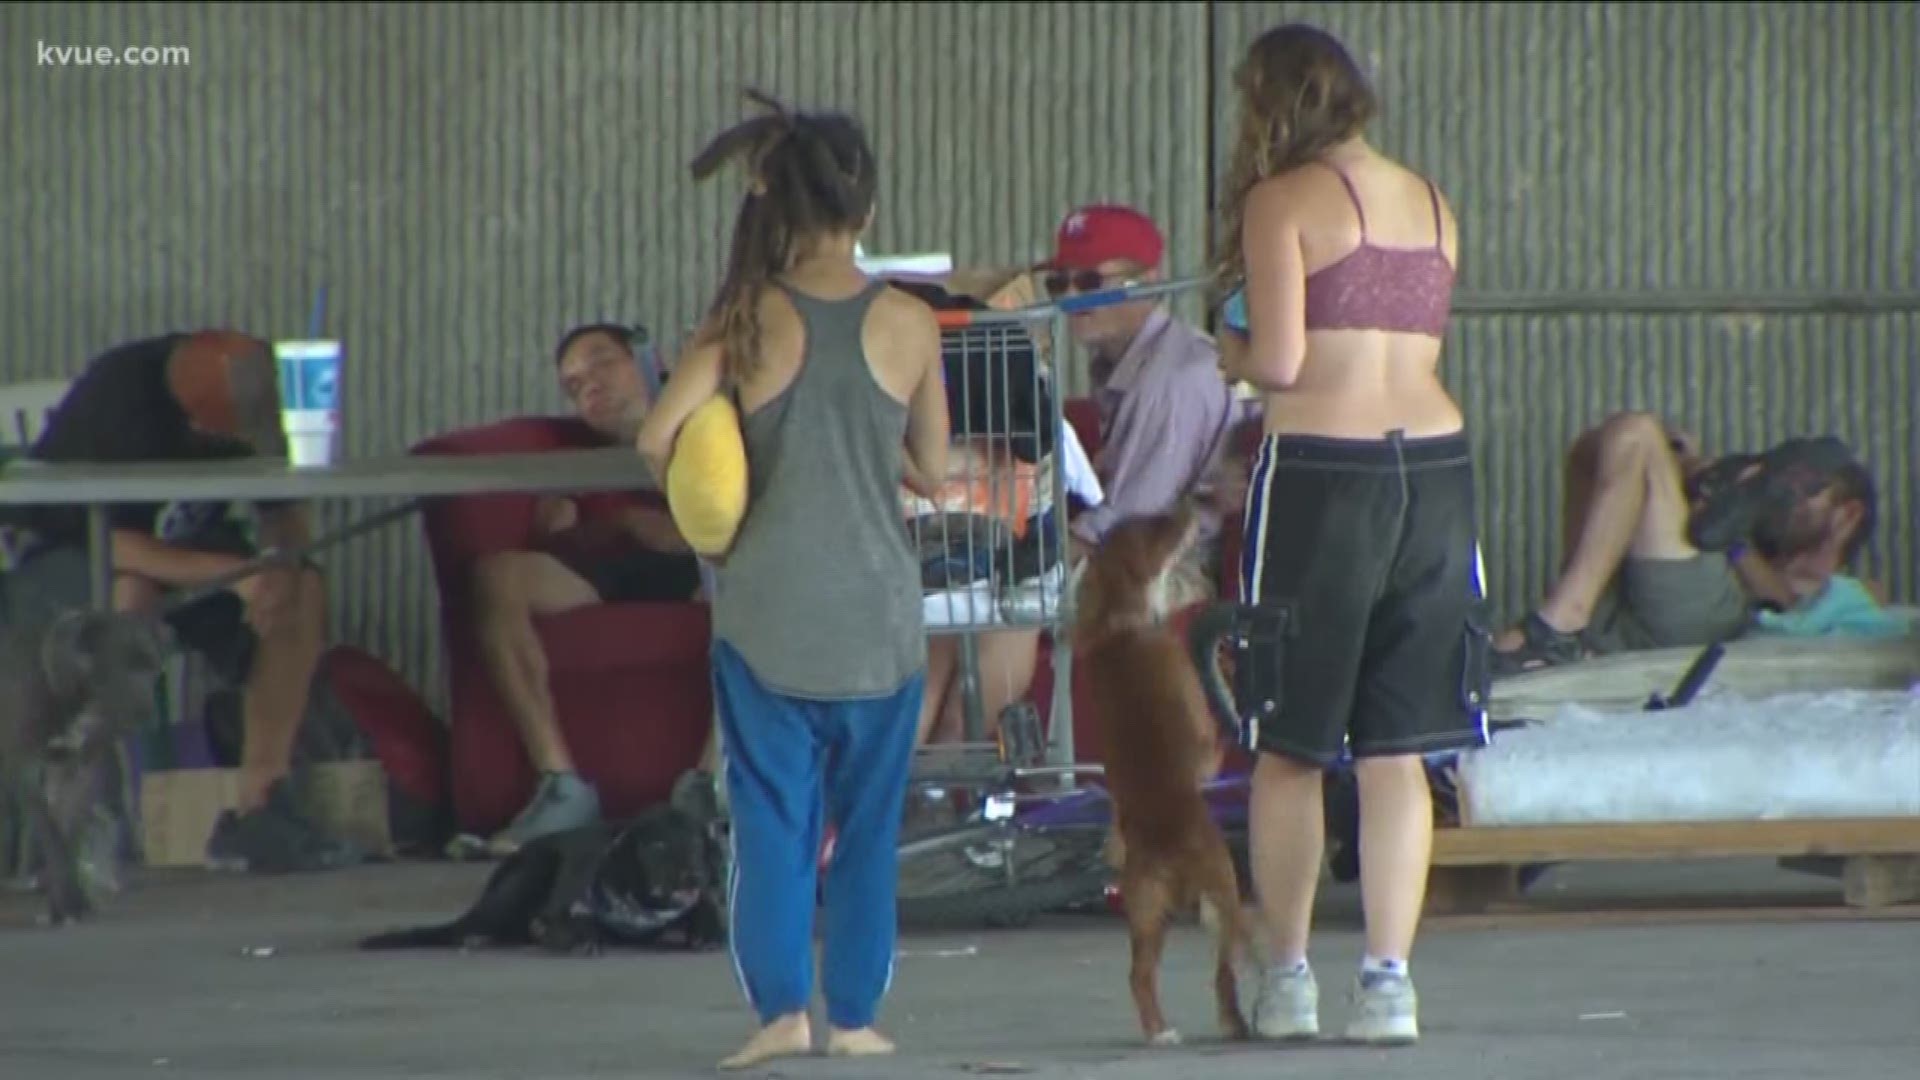 The governor's plan to start cleaning up homeless camps under Austin highways may not make as big of an impact as expected.